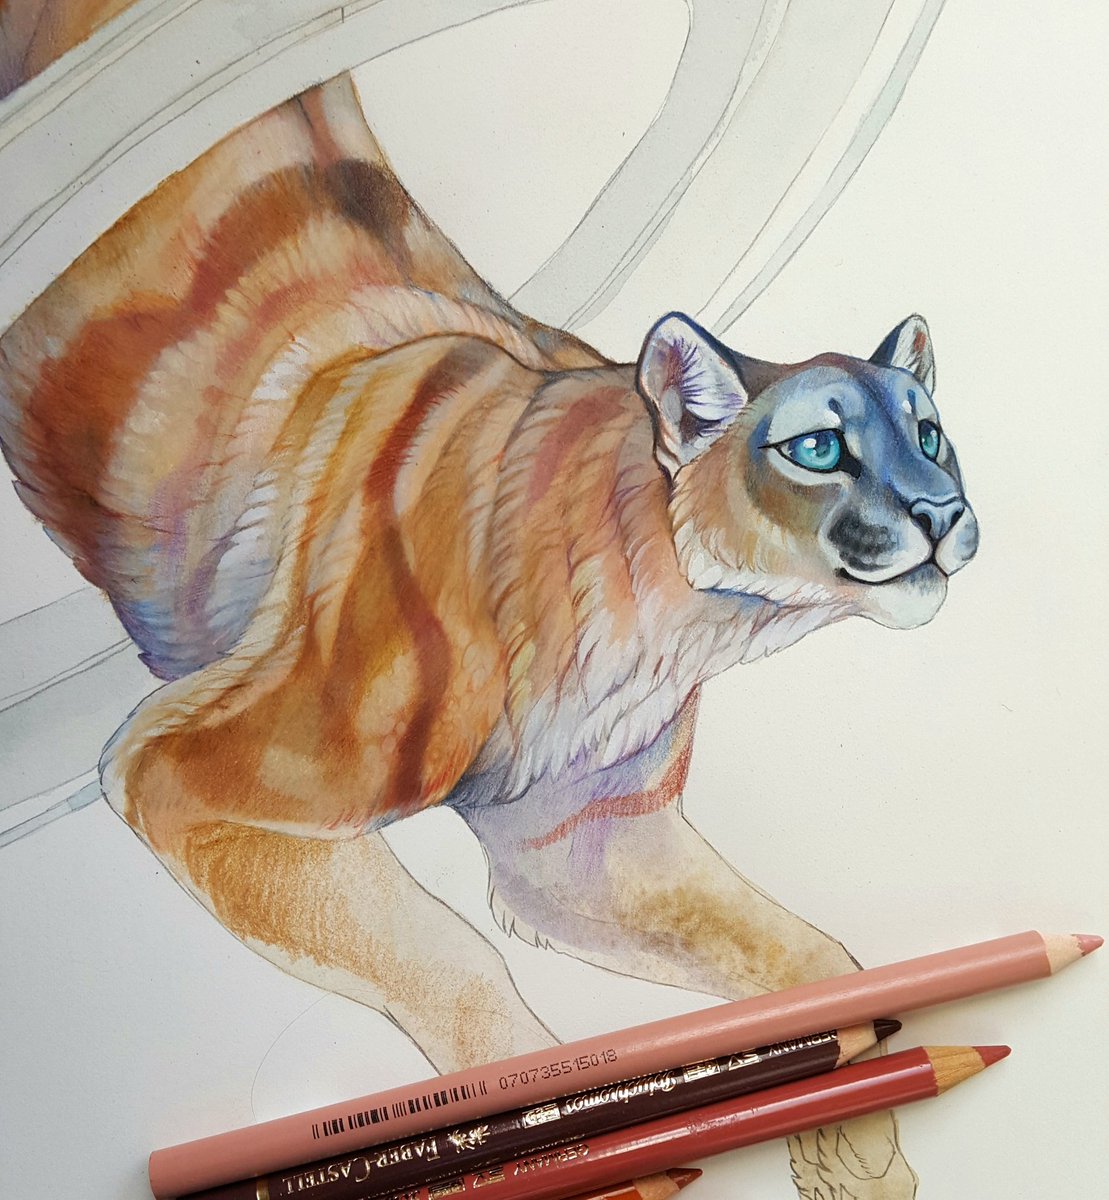 Started working on space cougar. Complicated planetary patterns #wipdrawing